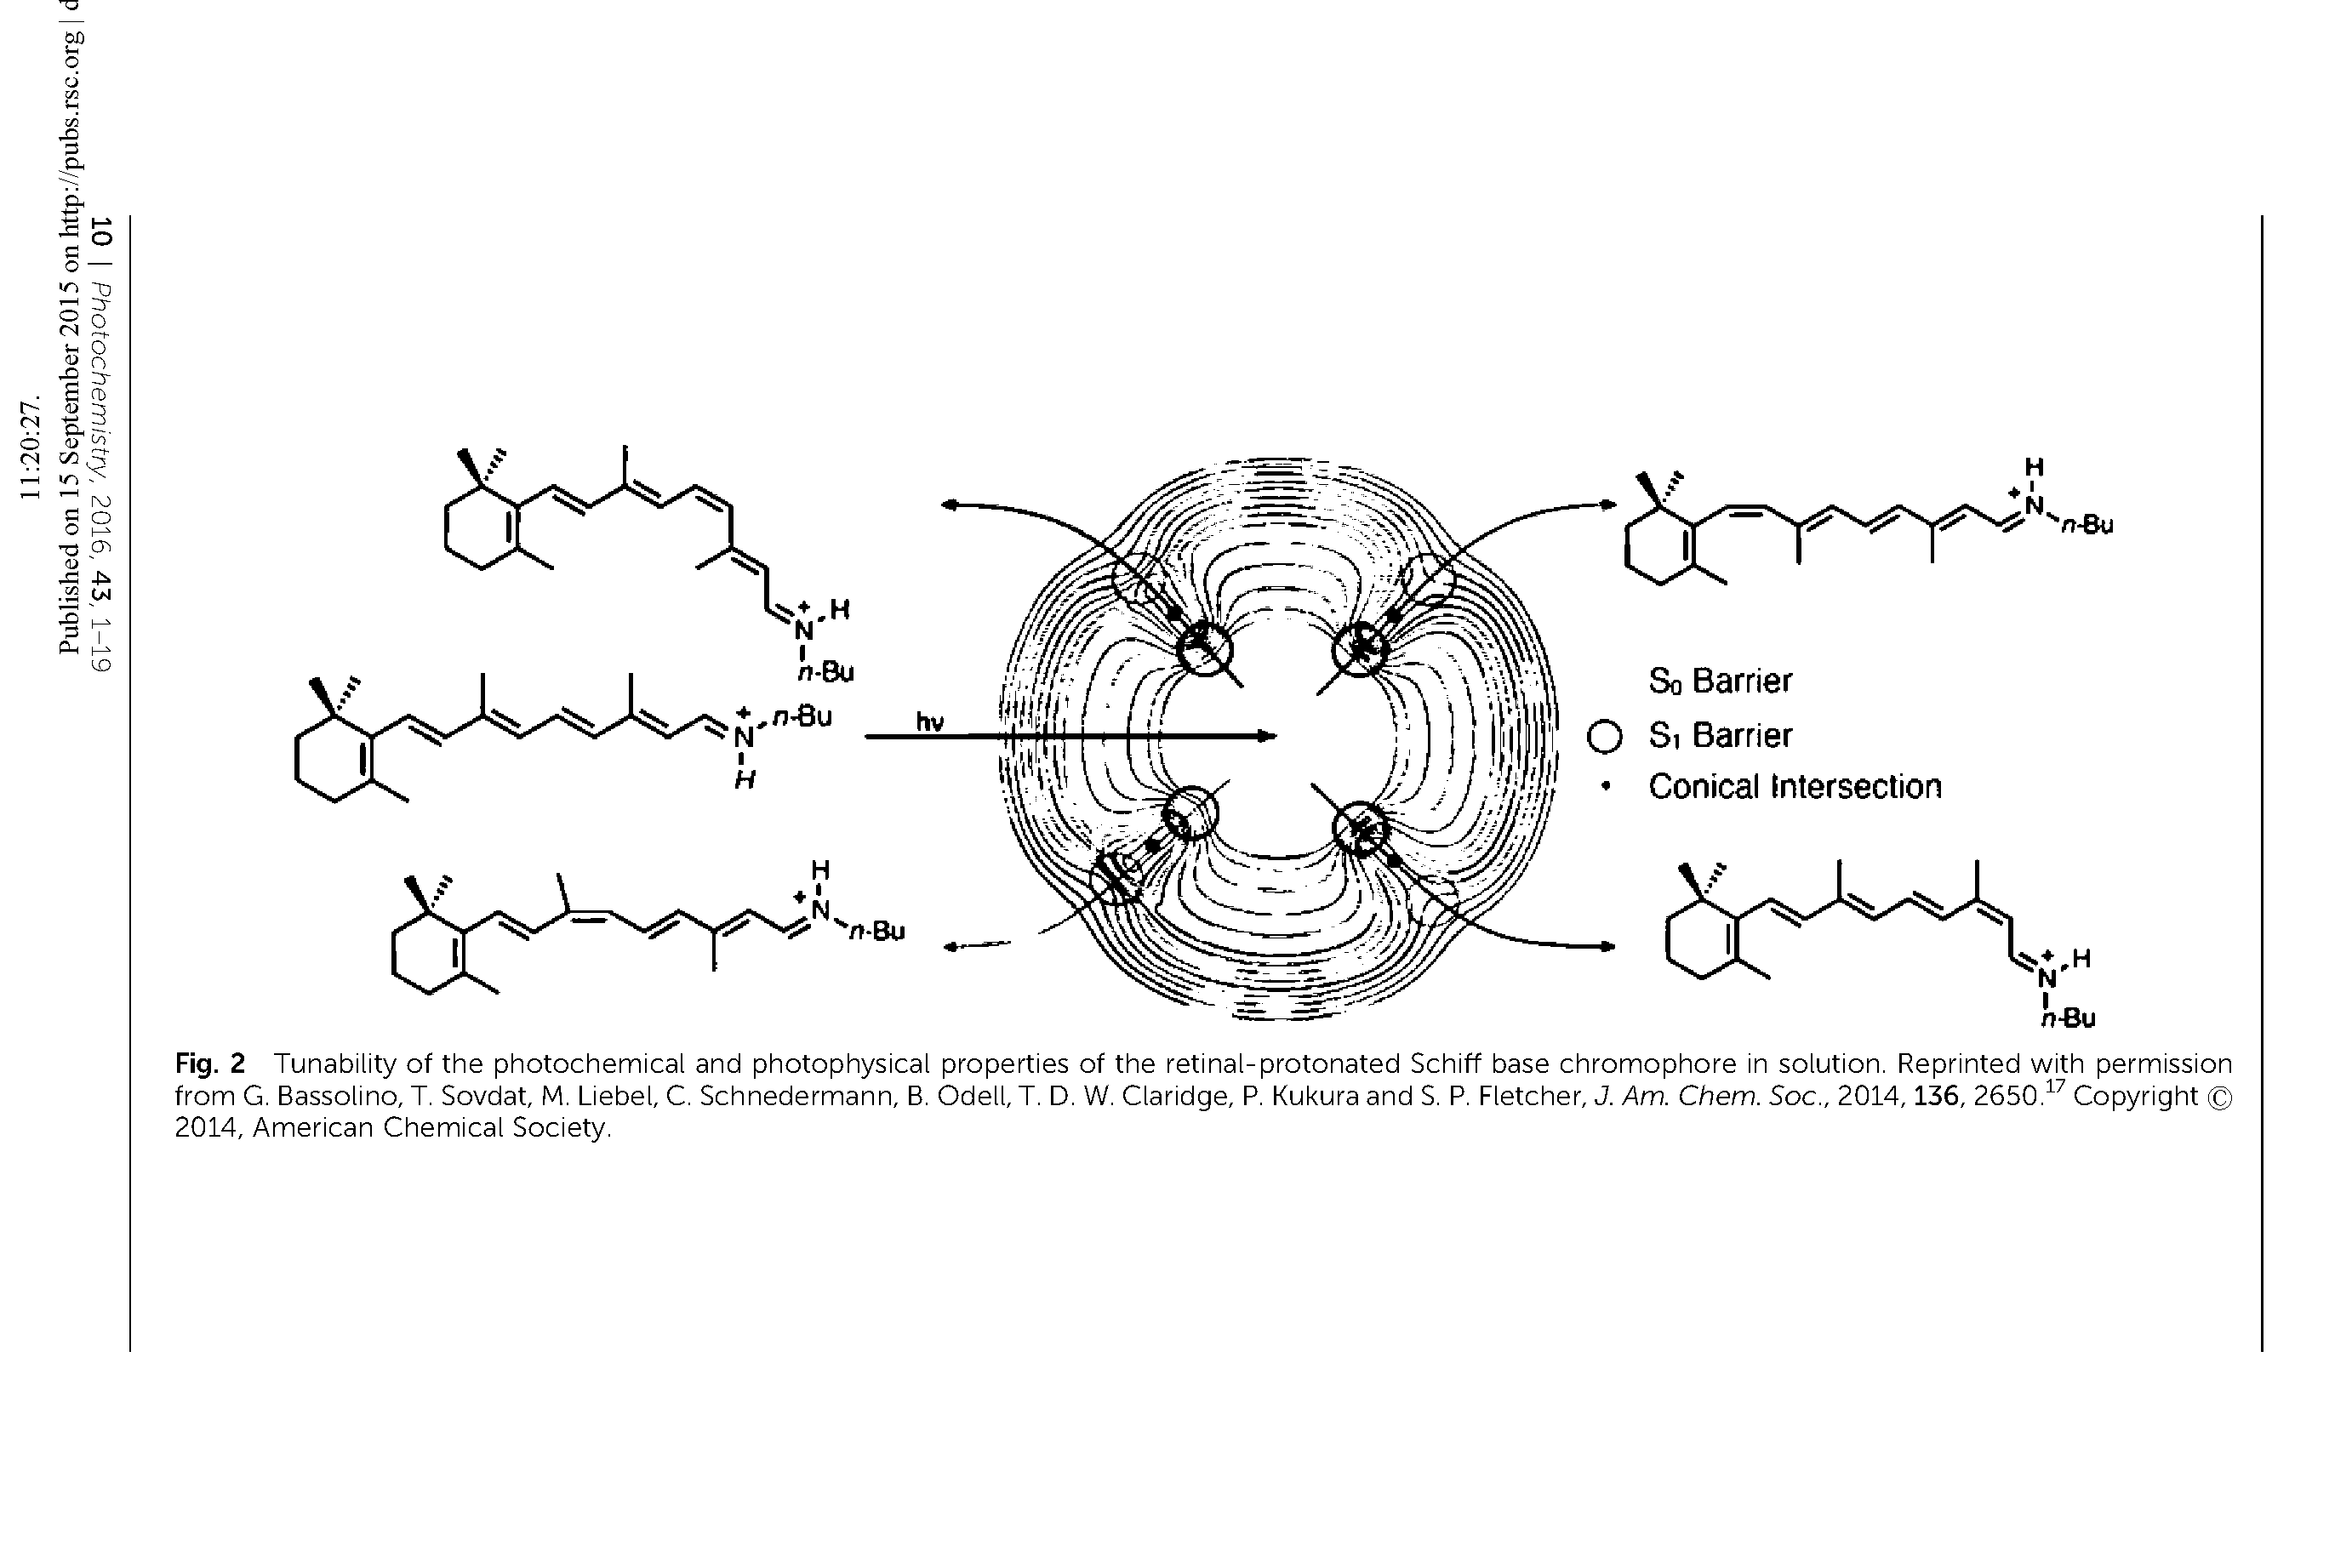 Fig. 2 Tunability of the photochemical and photophysical properties of the retinal-protonated Schiff base chromophore in solution. Reprinted with permission from G. Bassolino, T. Sovdat, M. Liebel, C. Schnedermann, B. Odell, T. D. W. Claridge, P. Kukura and S. P. Fletcher, J. Am. Chem. Soc., 2014,136, 2650. Copyright 2014, American Chemical Society.